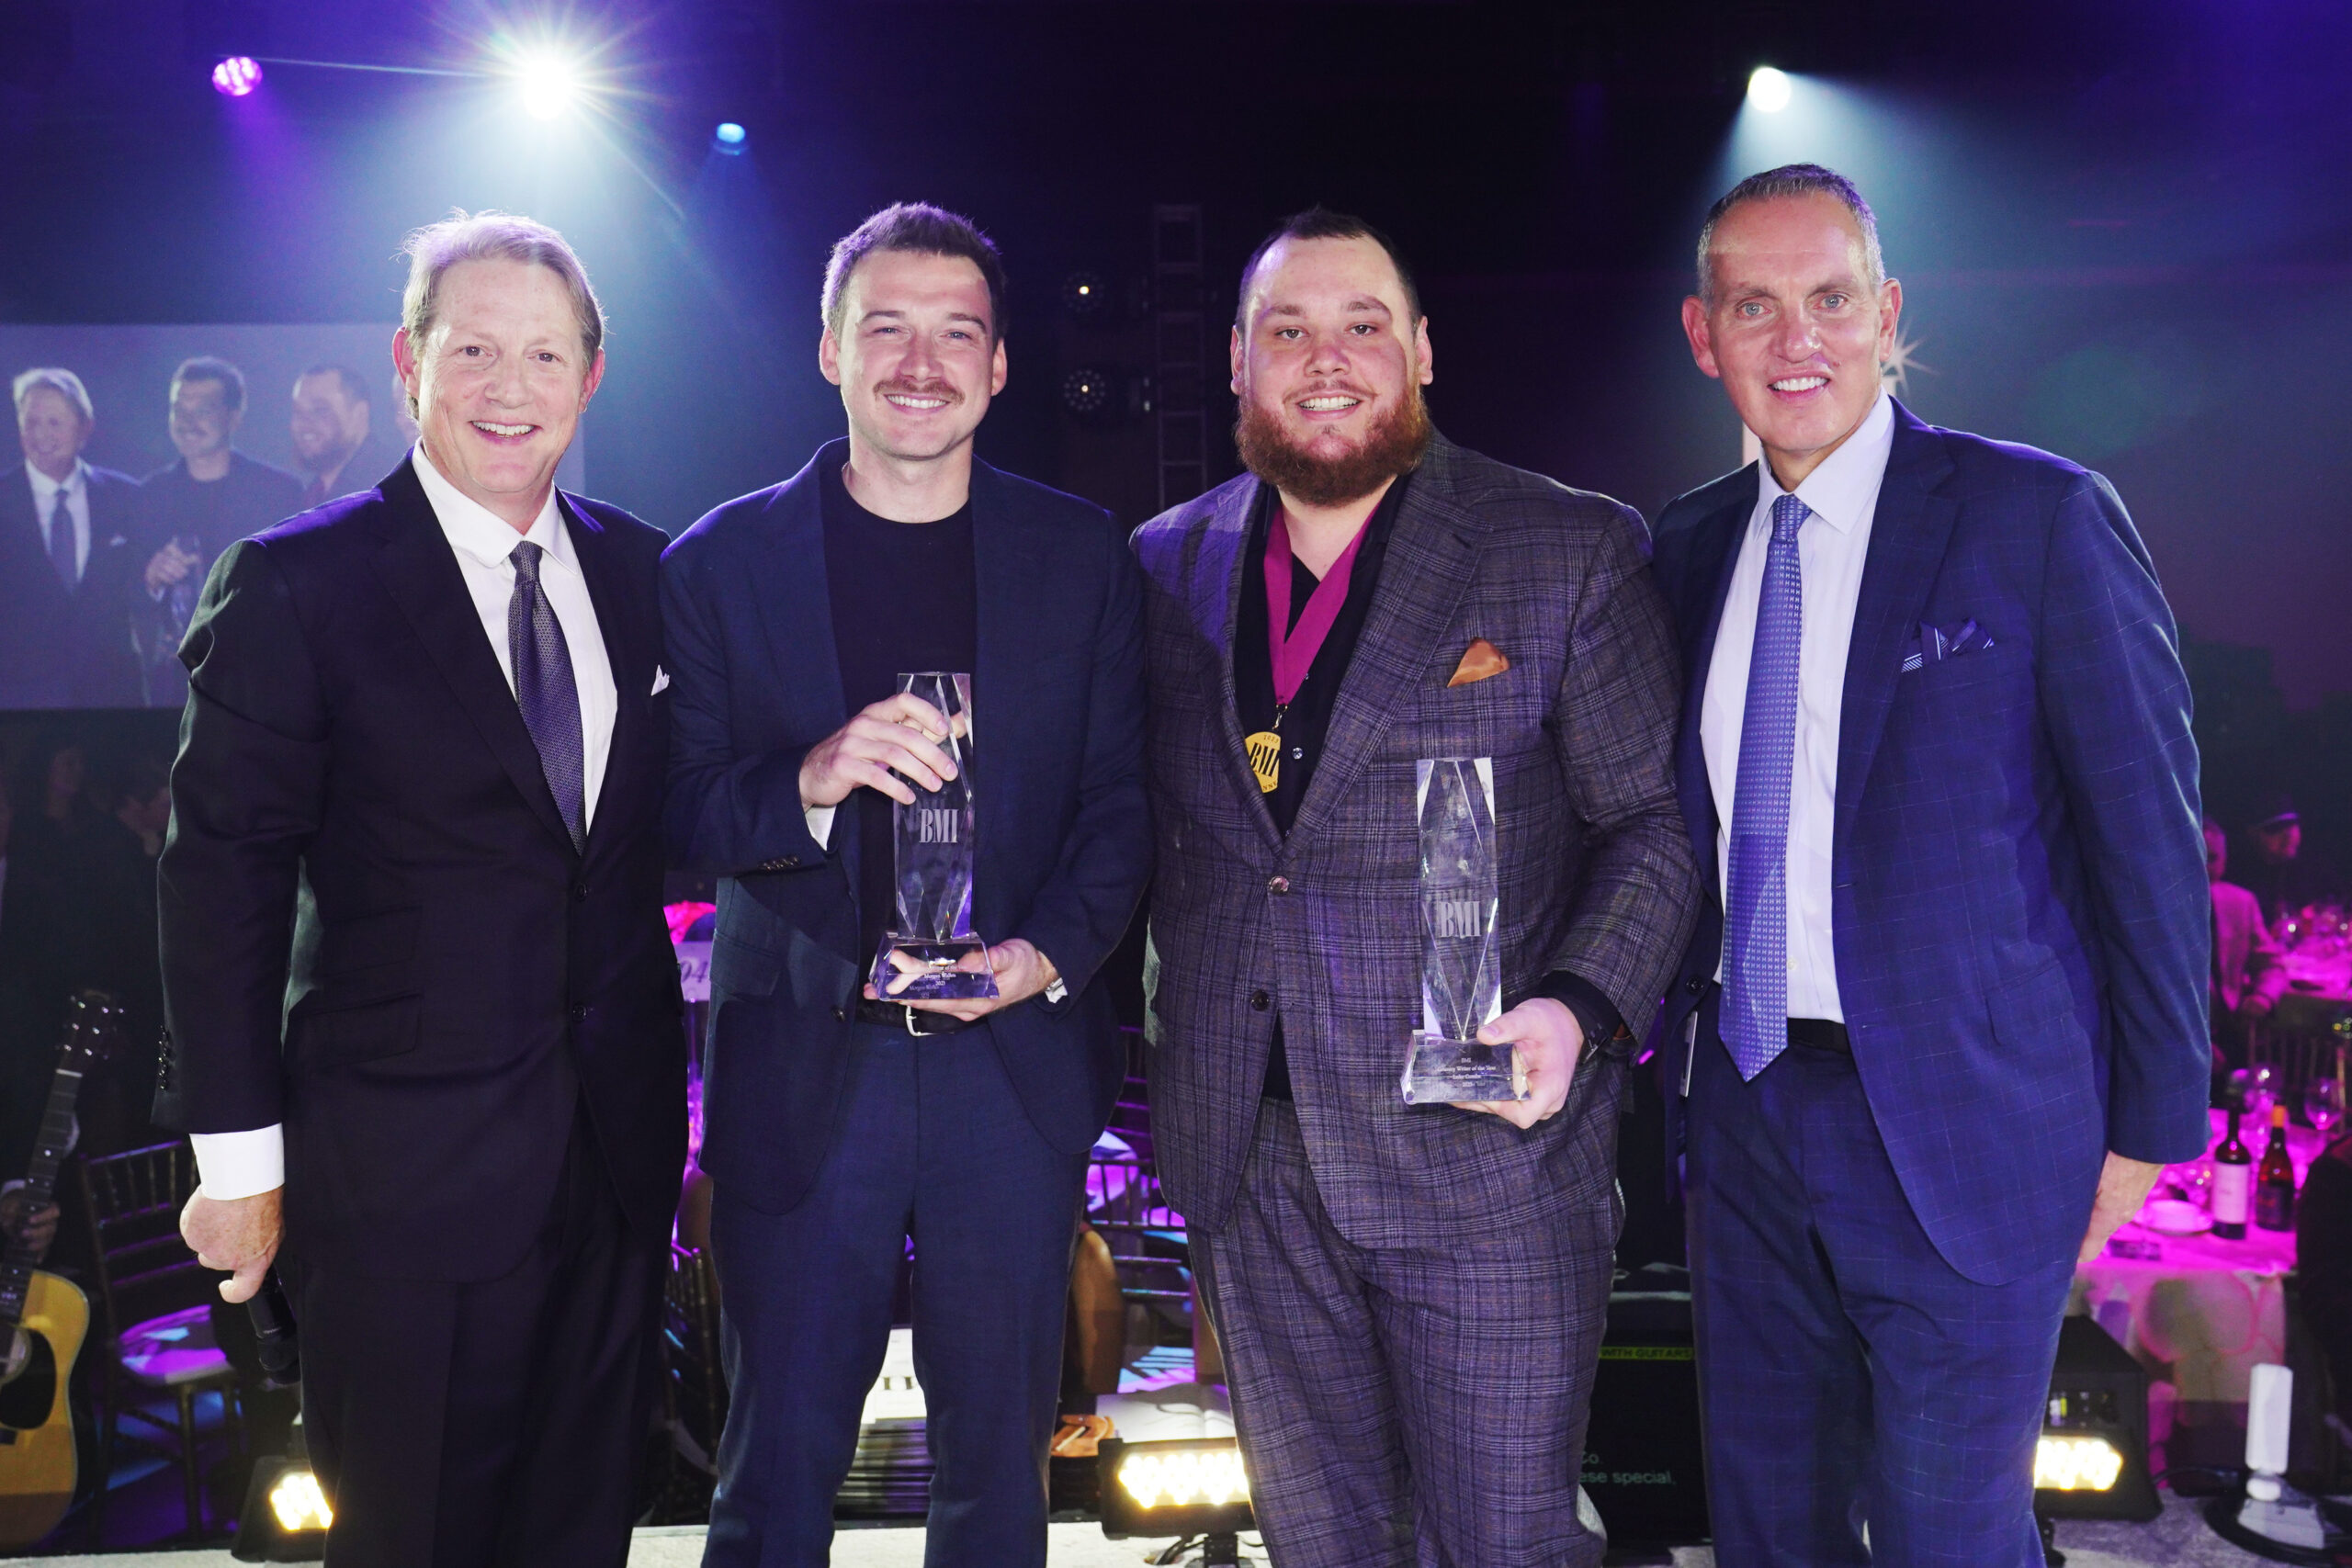 Morgan Wallen and Luke Combs Tie for Coveted “Songwriter of the Year” Honor at 2023 BMI Country Awards